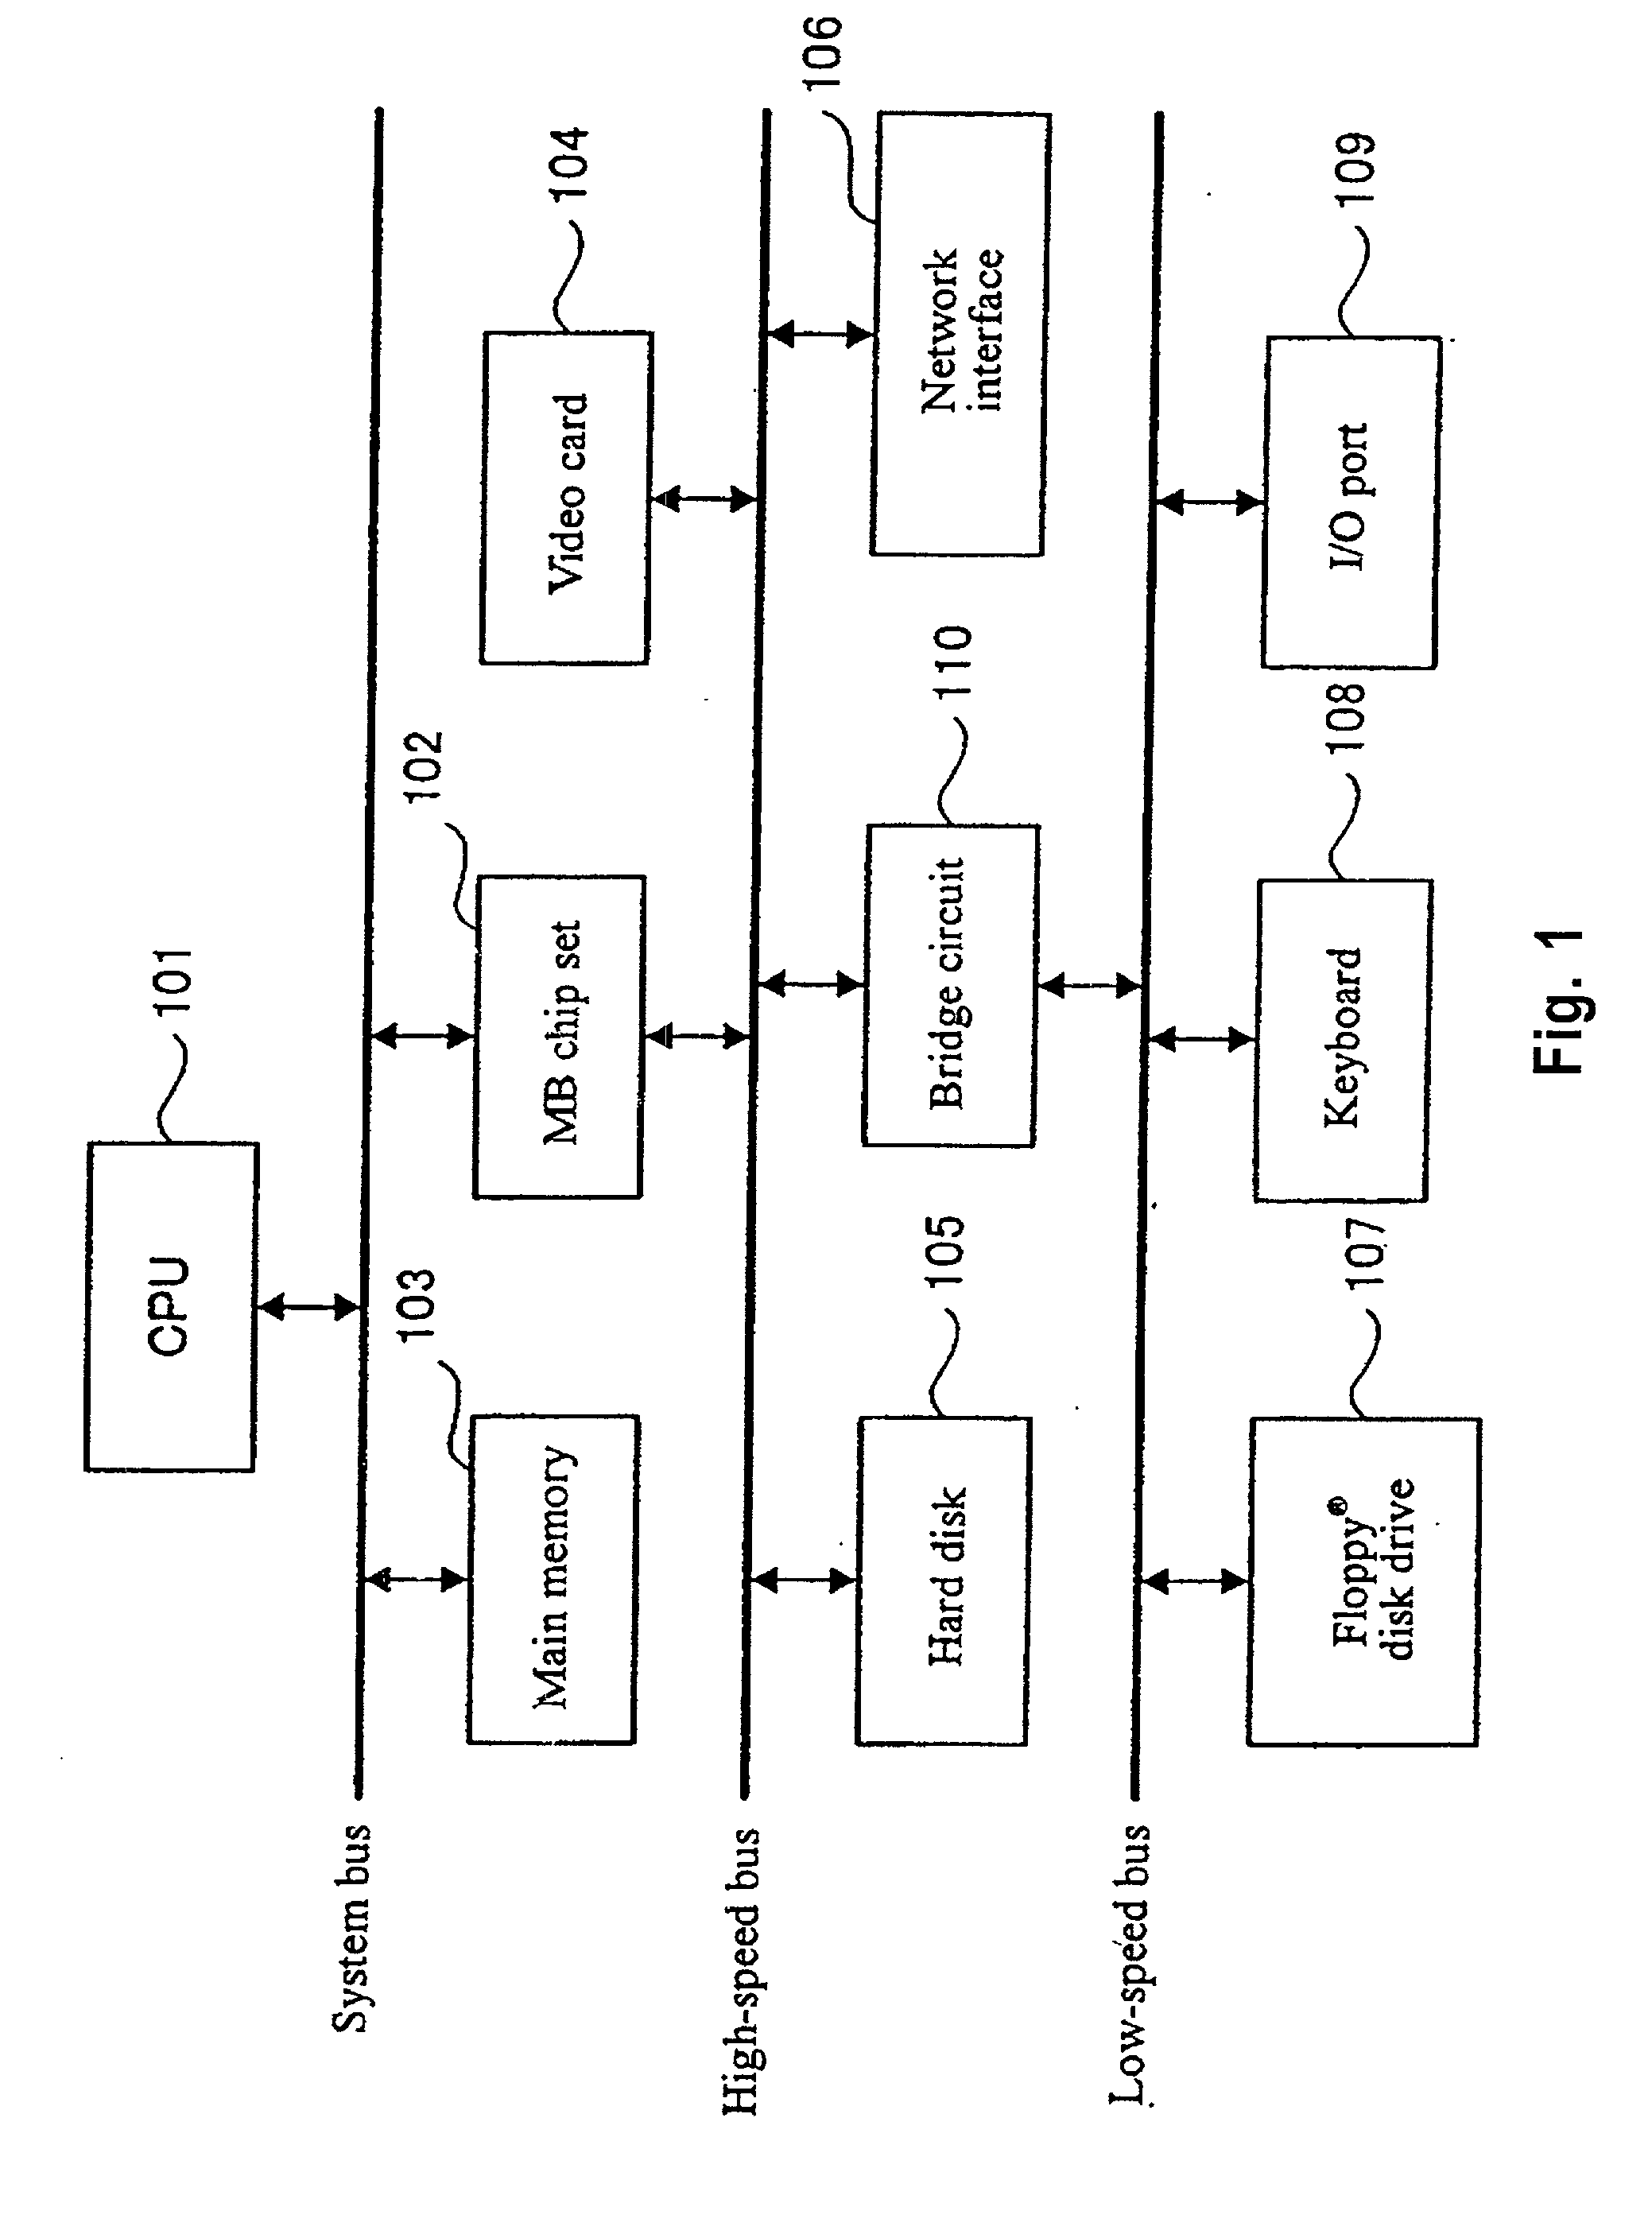 Application editing apparatus and data processing method and program